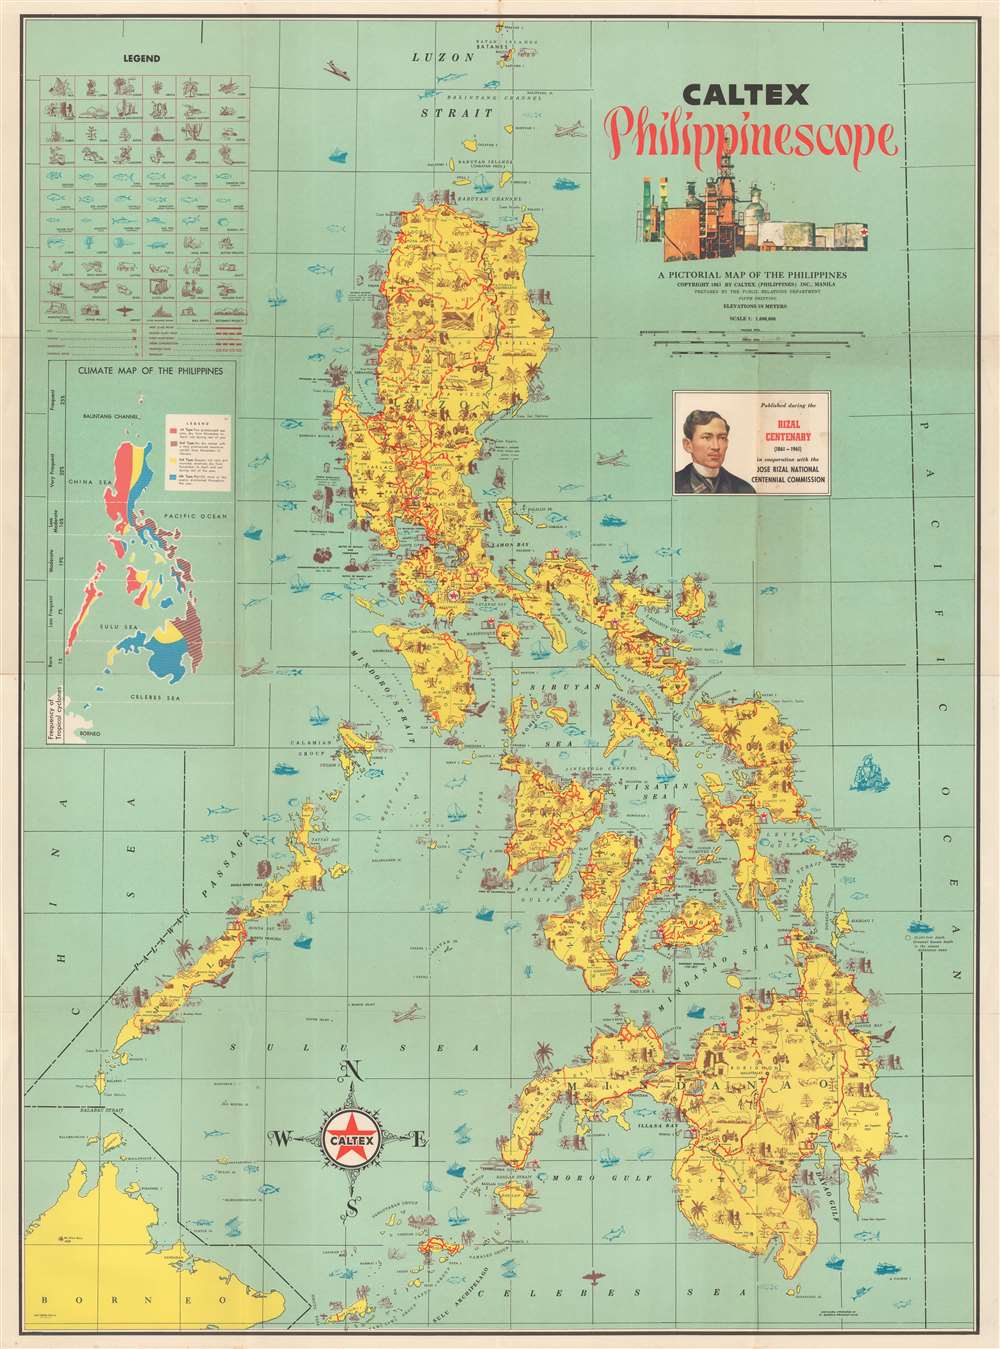 Caltex Philippinescope. A Pictorial Map of the Philippines. - Main View